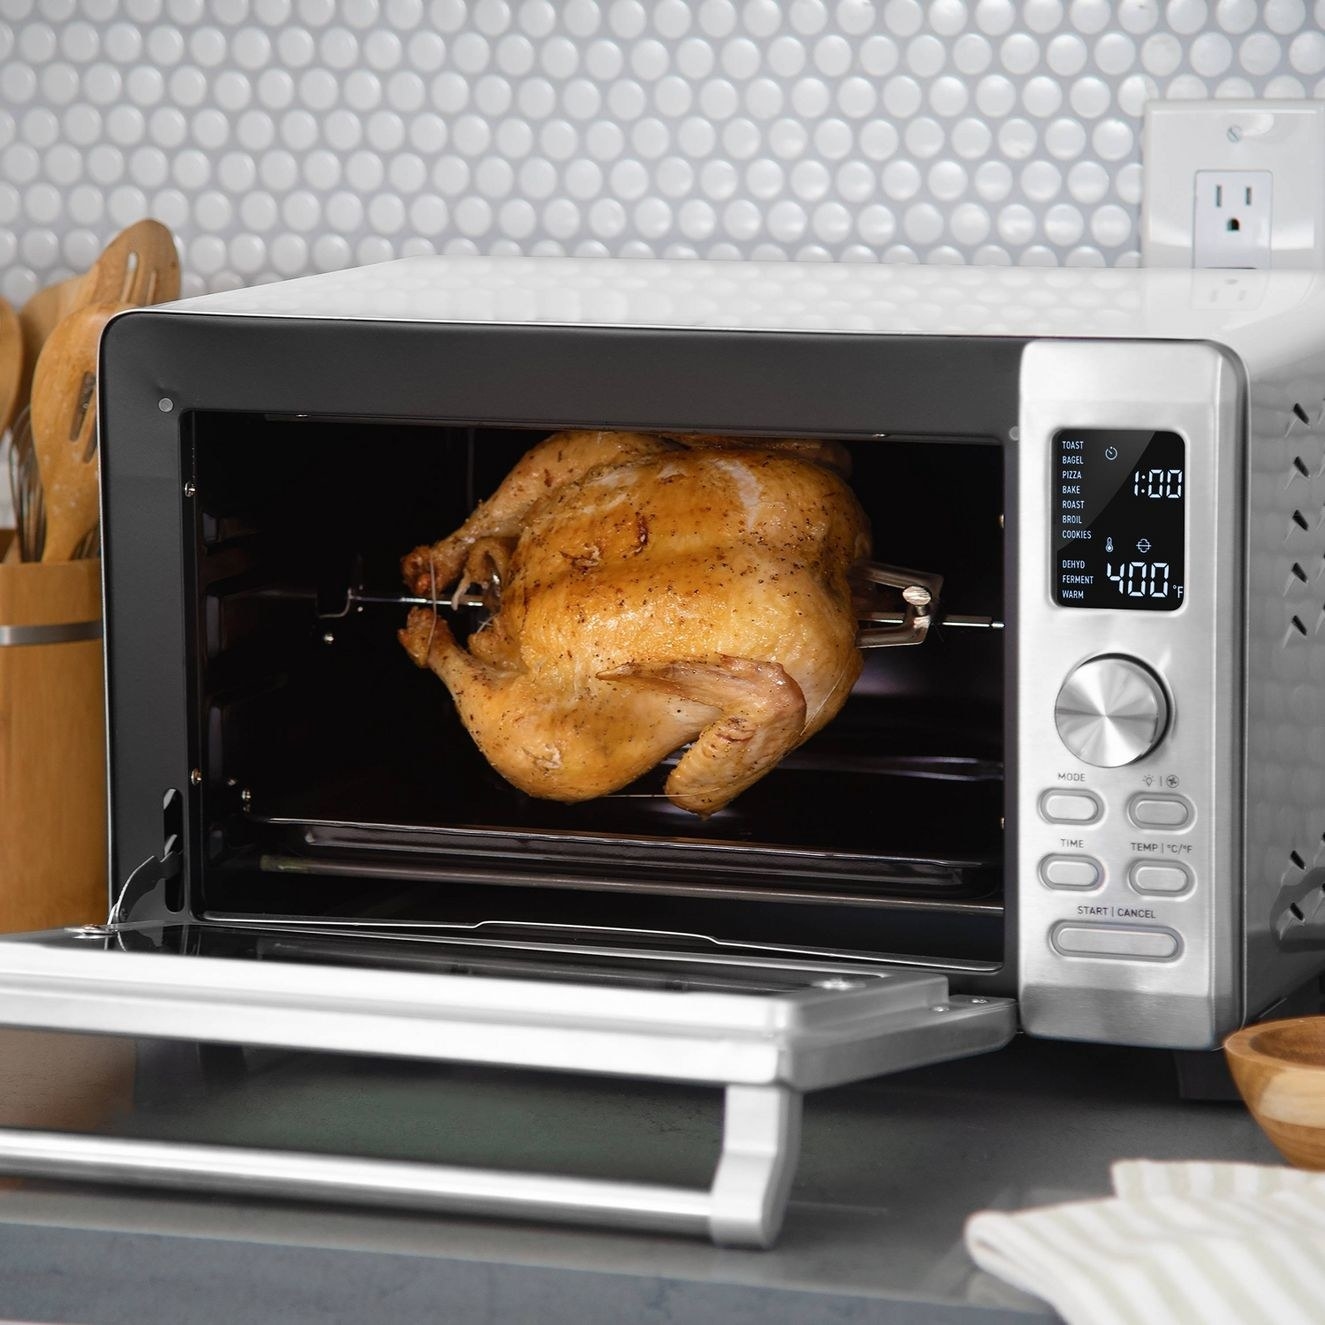 The convection oven with a chicken in it